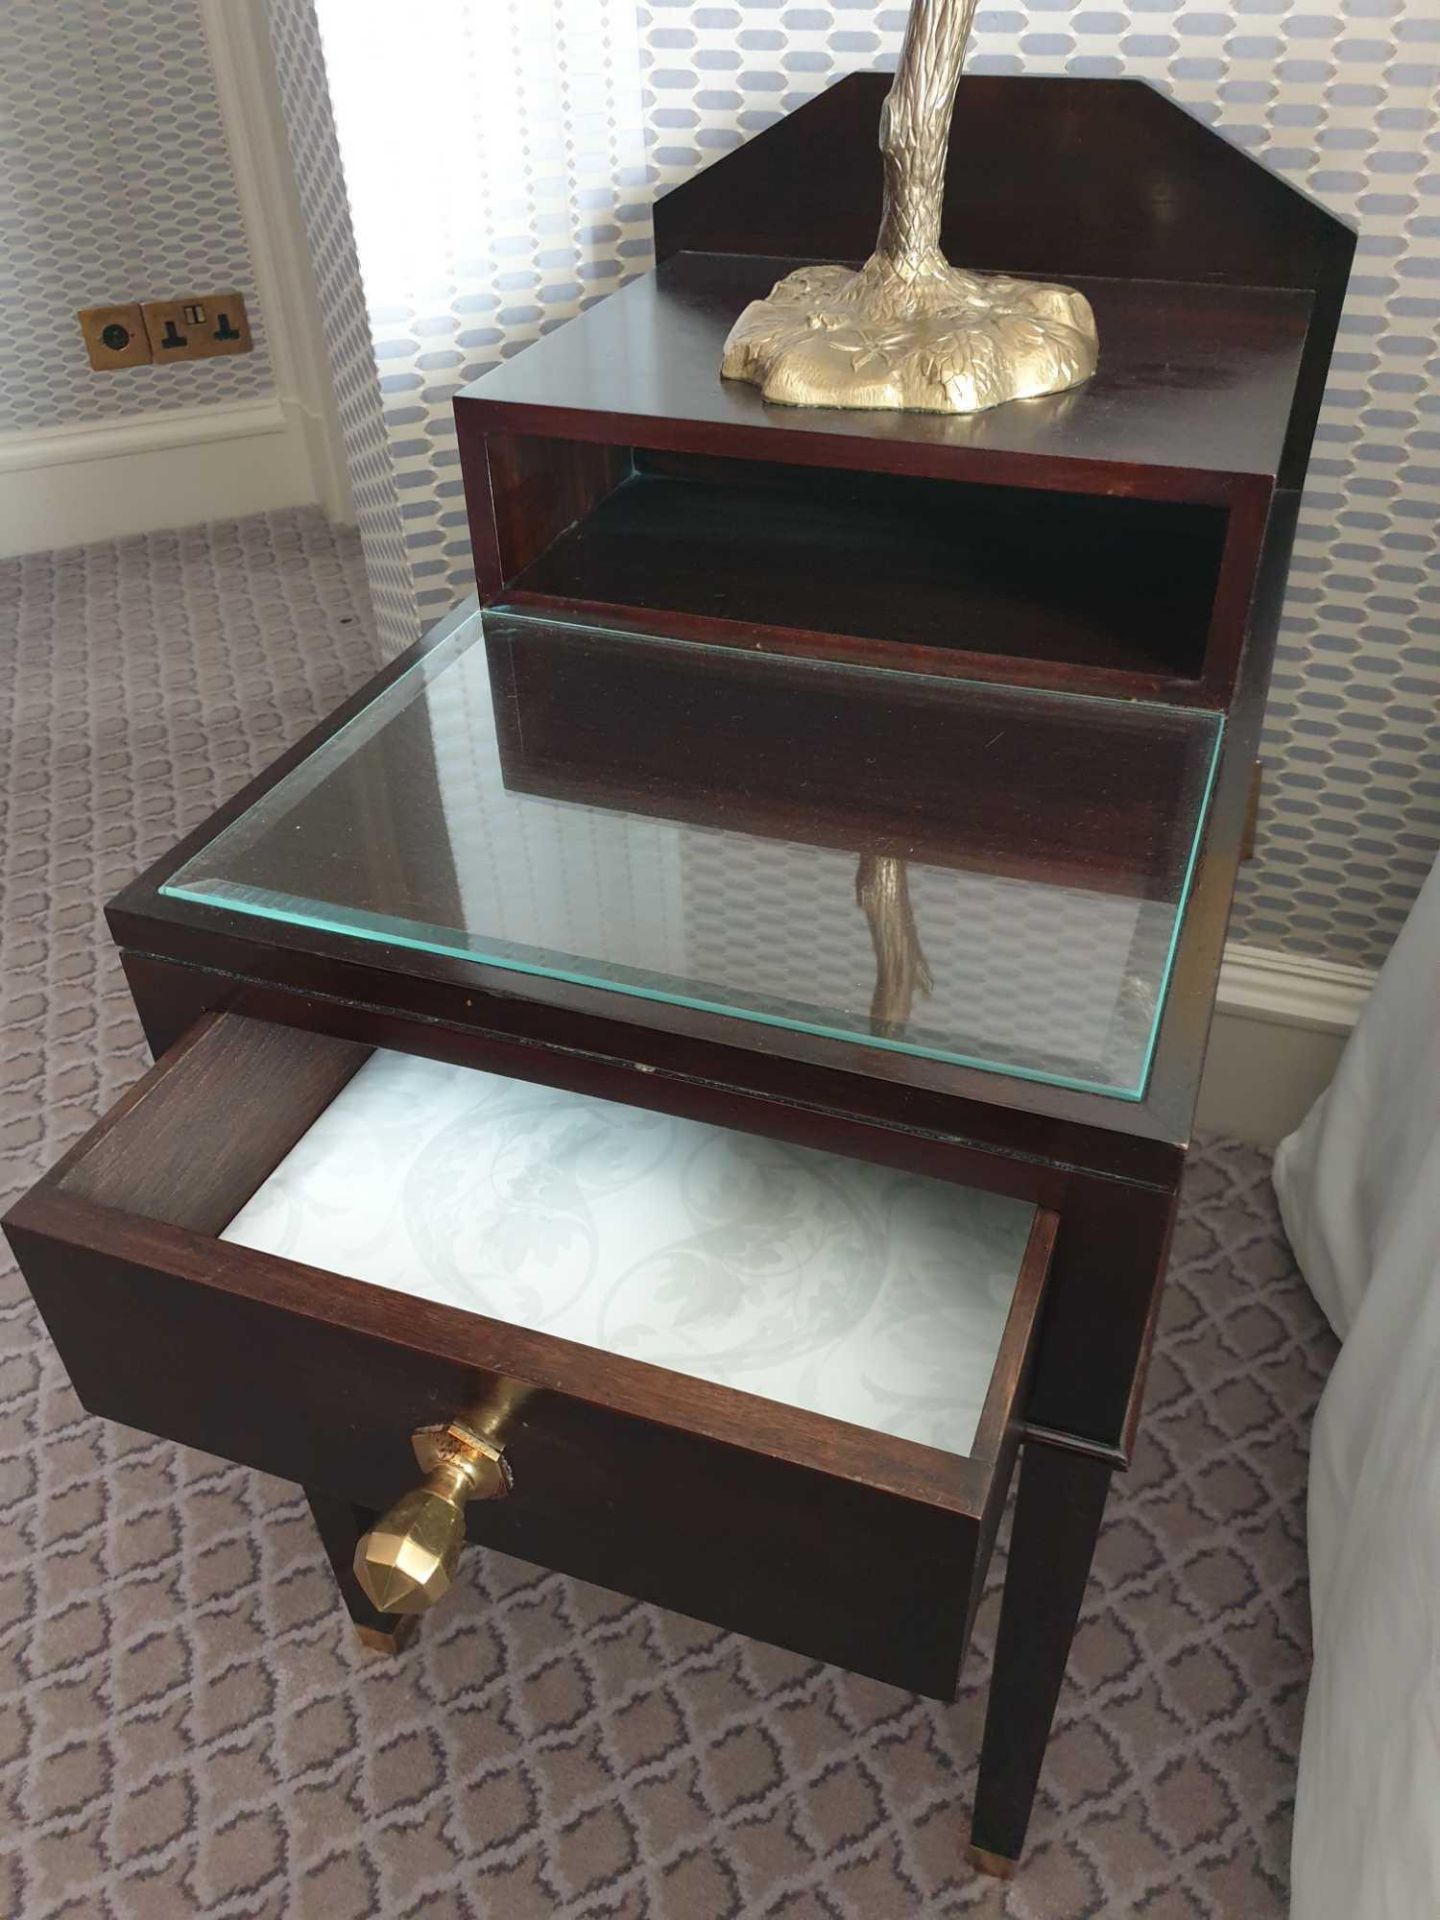 A Pair Of Two Tier Bedside Nightstands With Antiqued Plate Top With Storage Compartments Mounted - Image 3 of 3